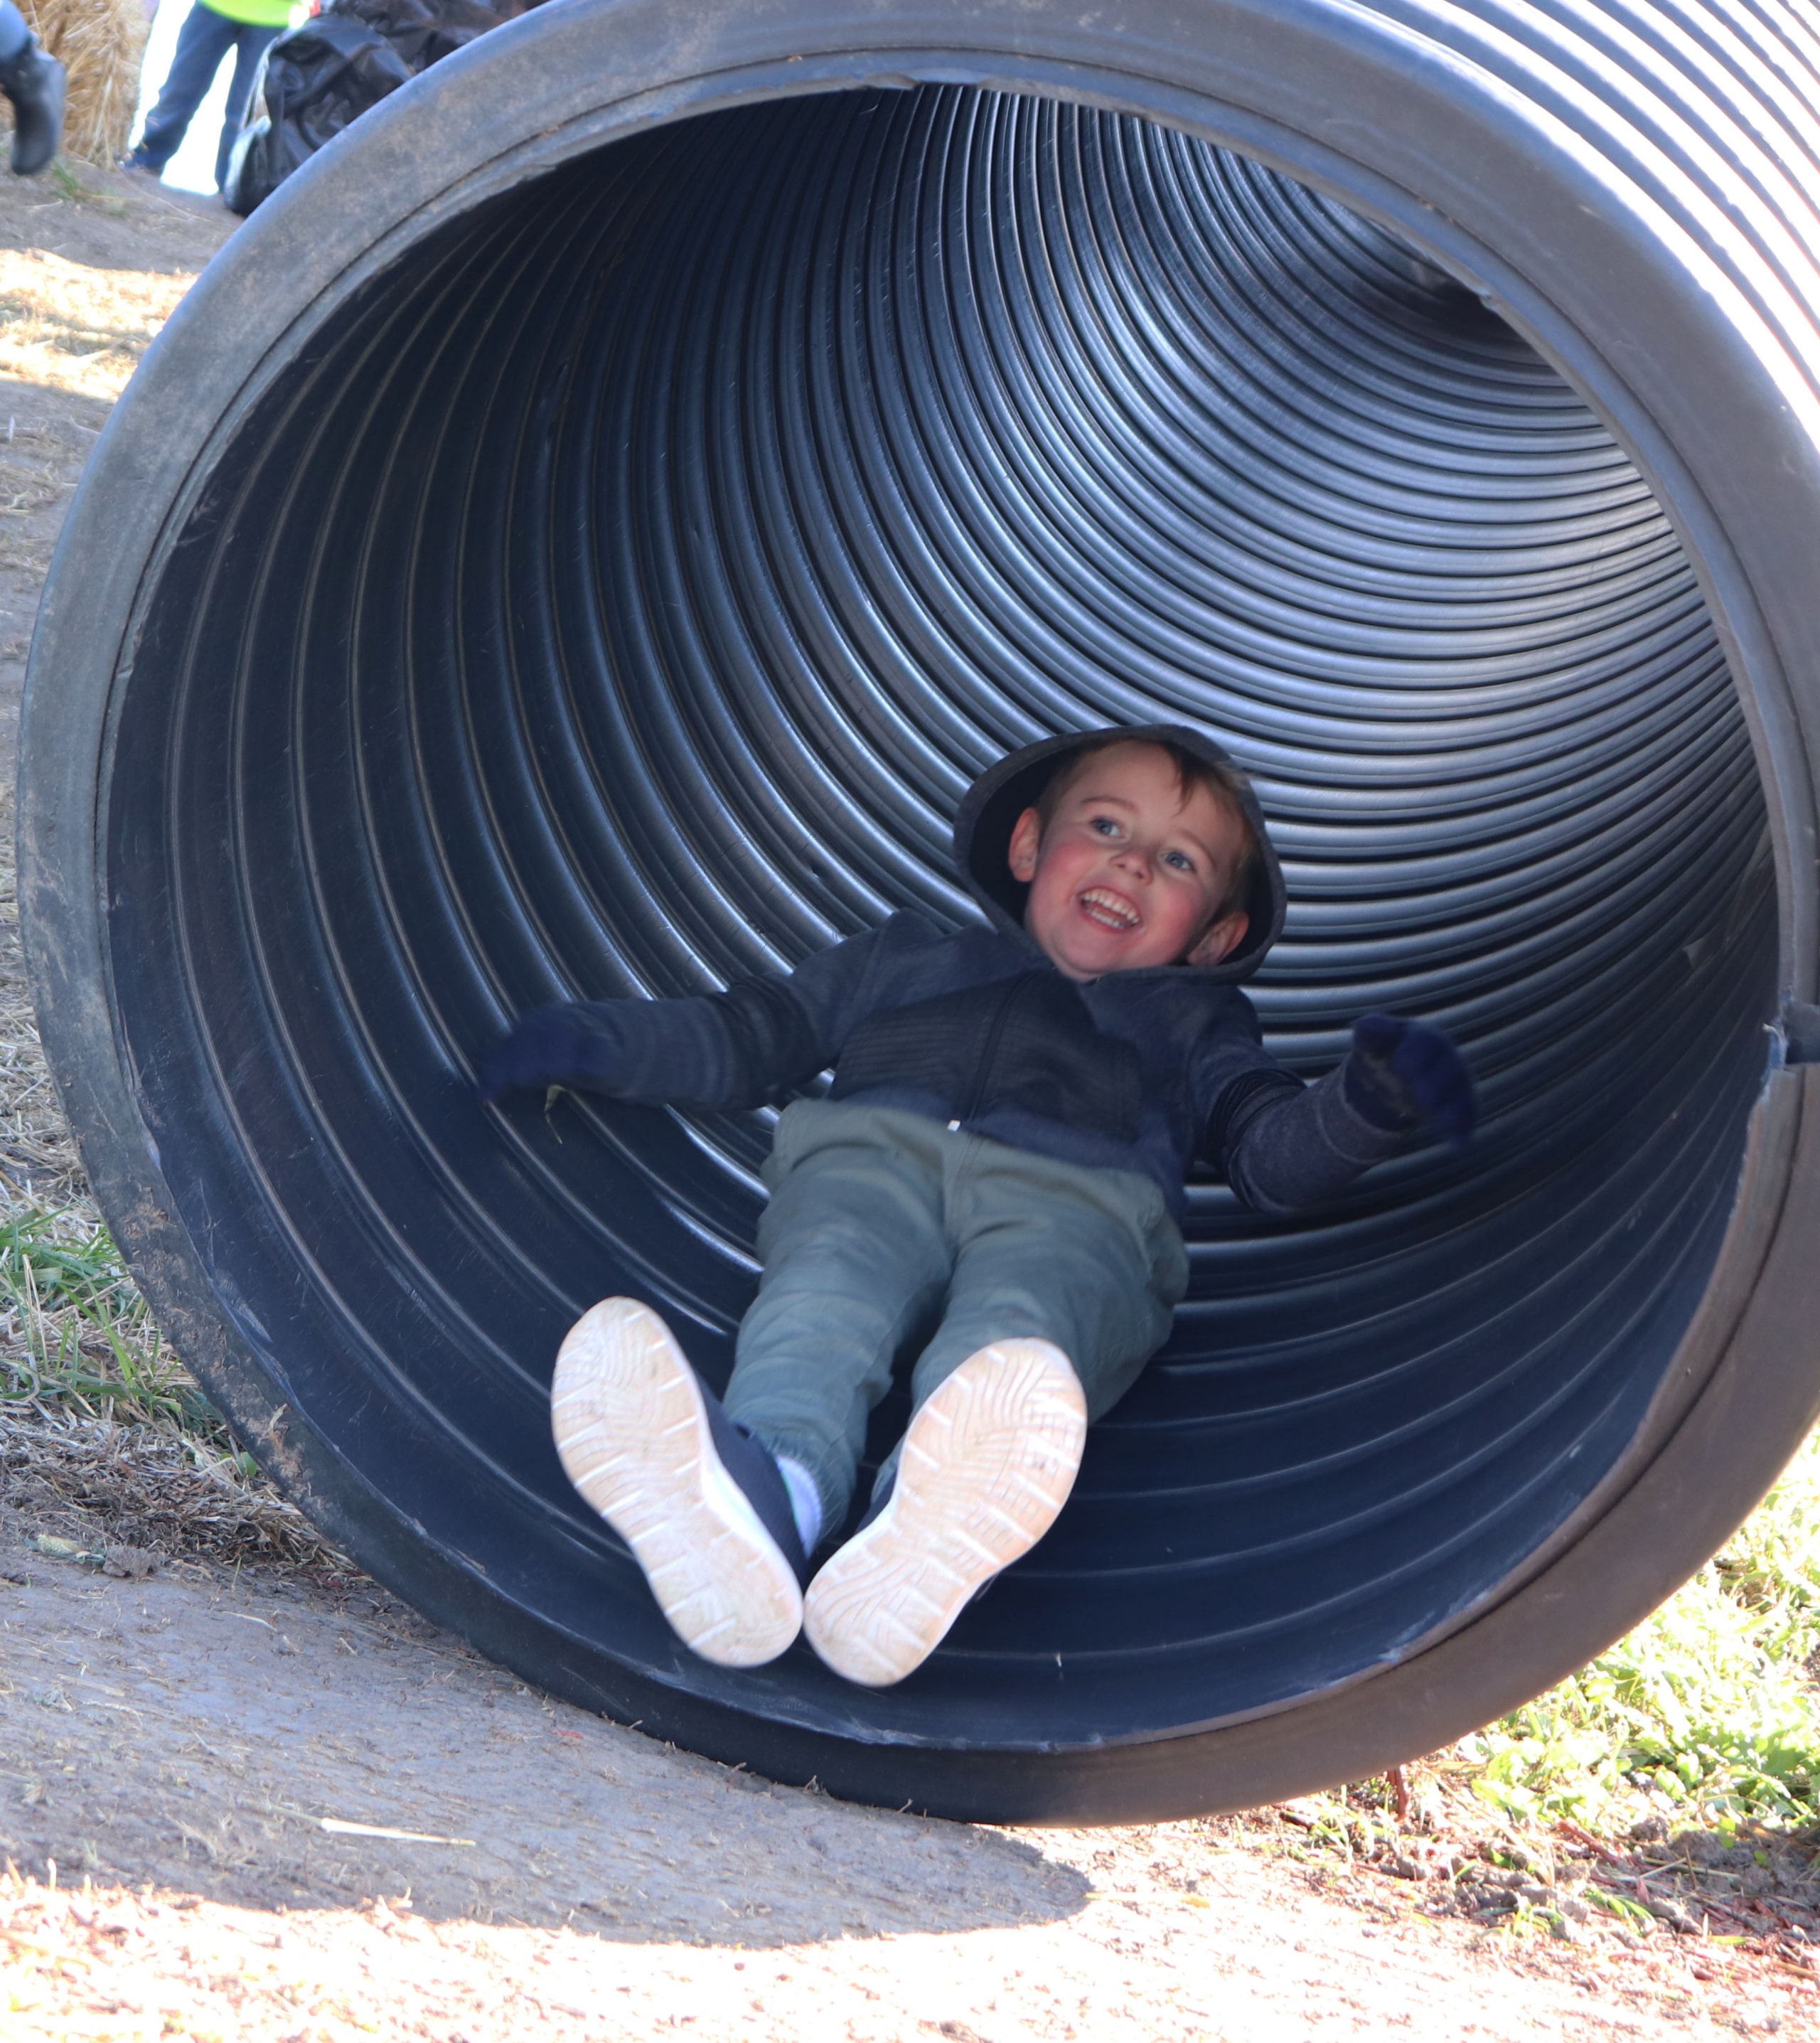 The kindergarten classes took a field trip to Windmill Acres Pumpkin Patch on October 23rd.